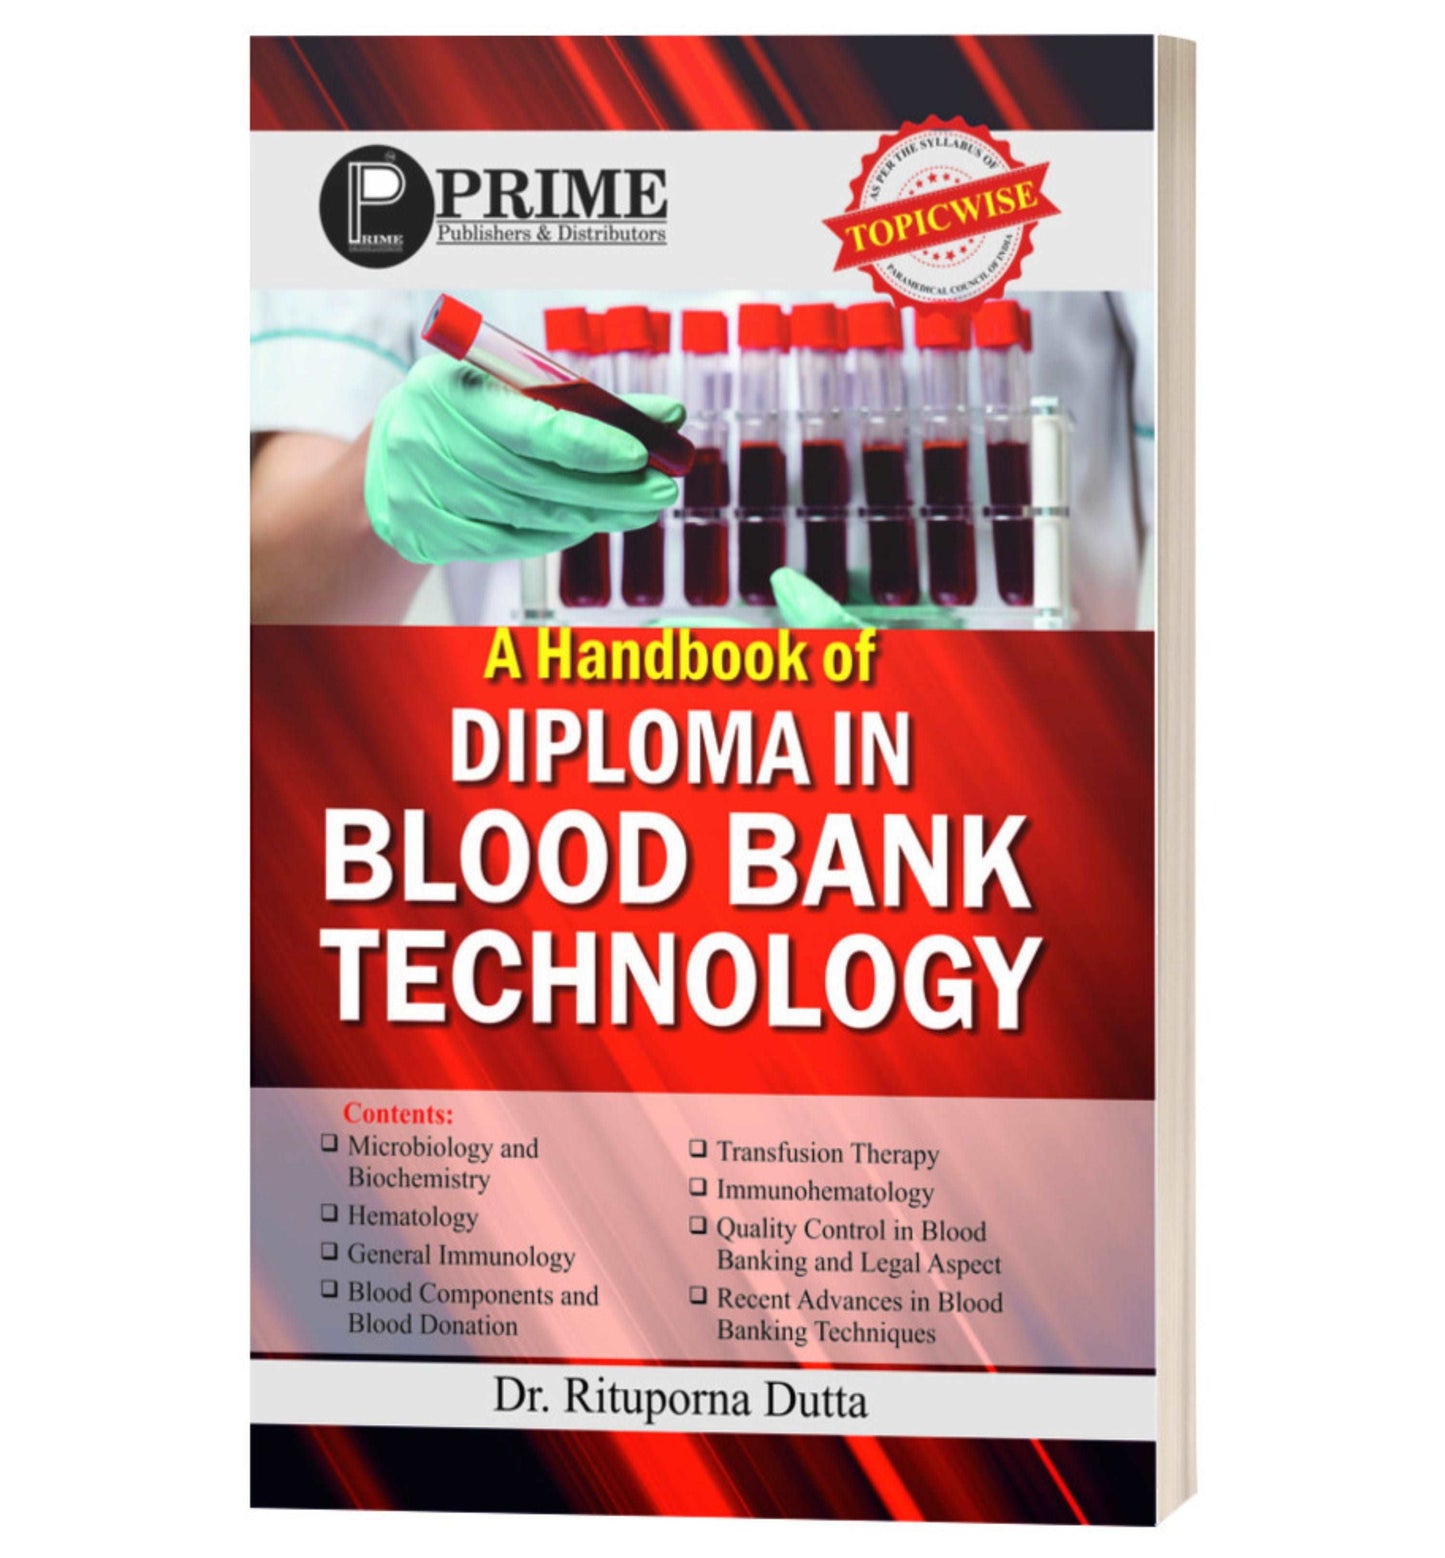 A handbook of Diploma in Blood Bank Technology